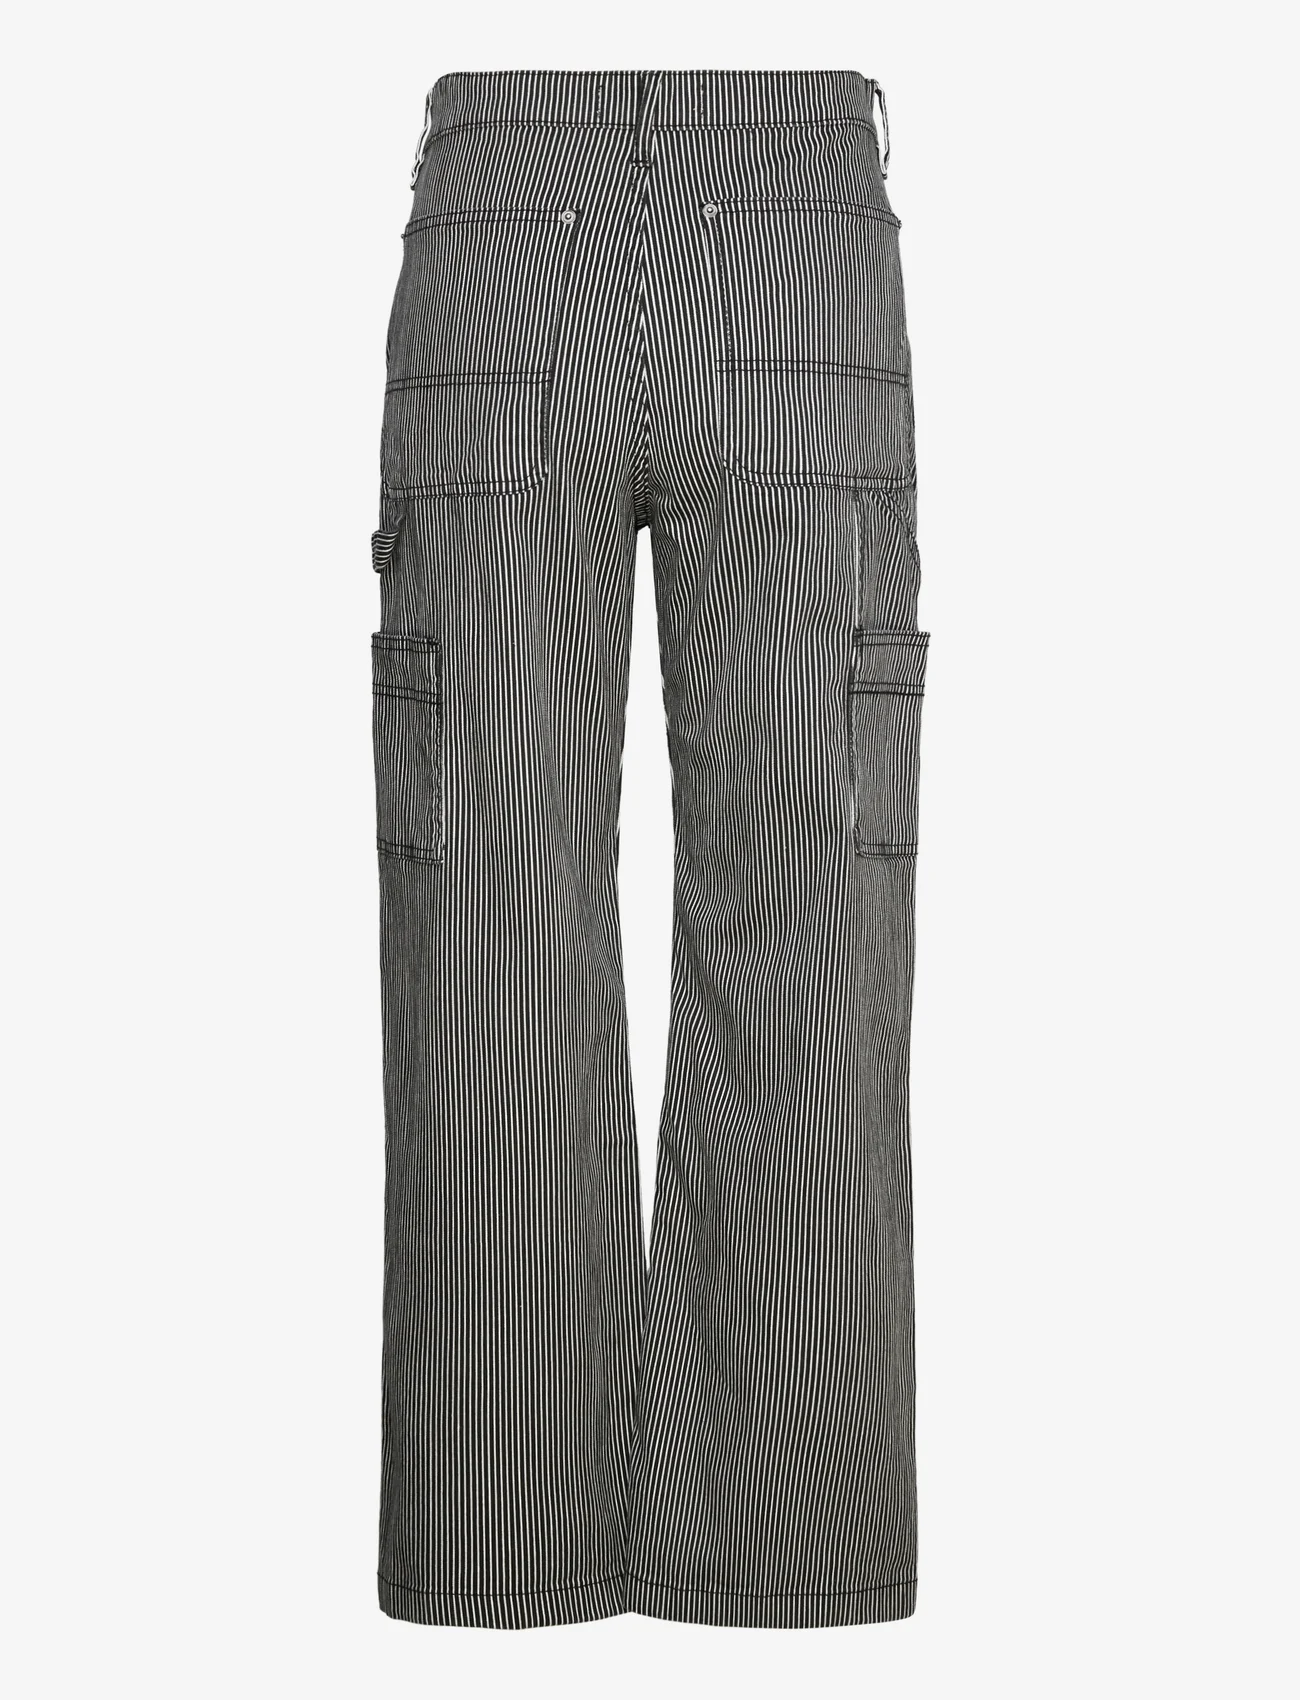 Sofie Schnoor - Trousers - vide jeans - white black striped - 1